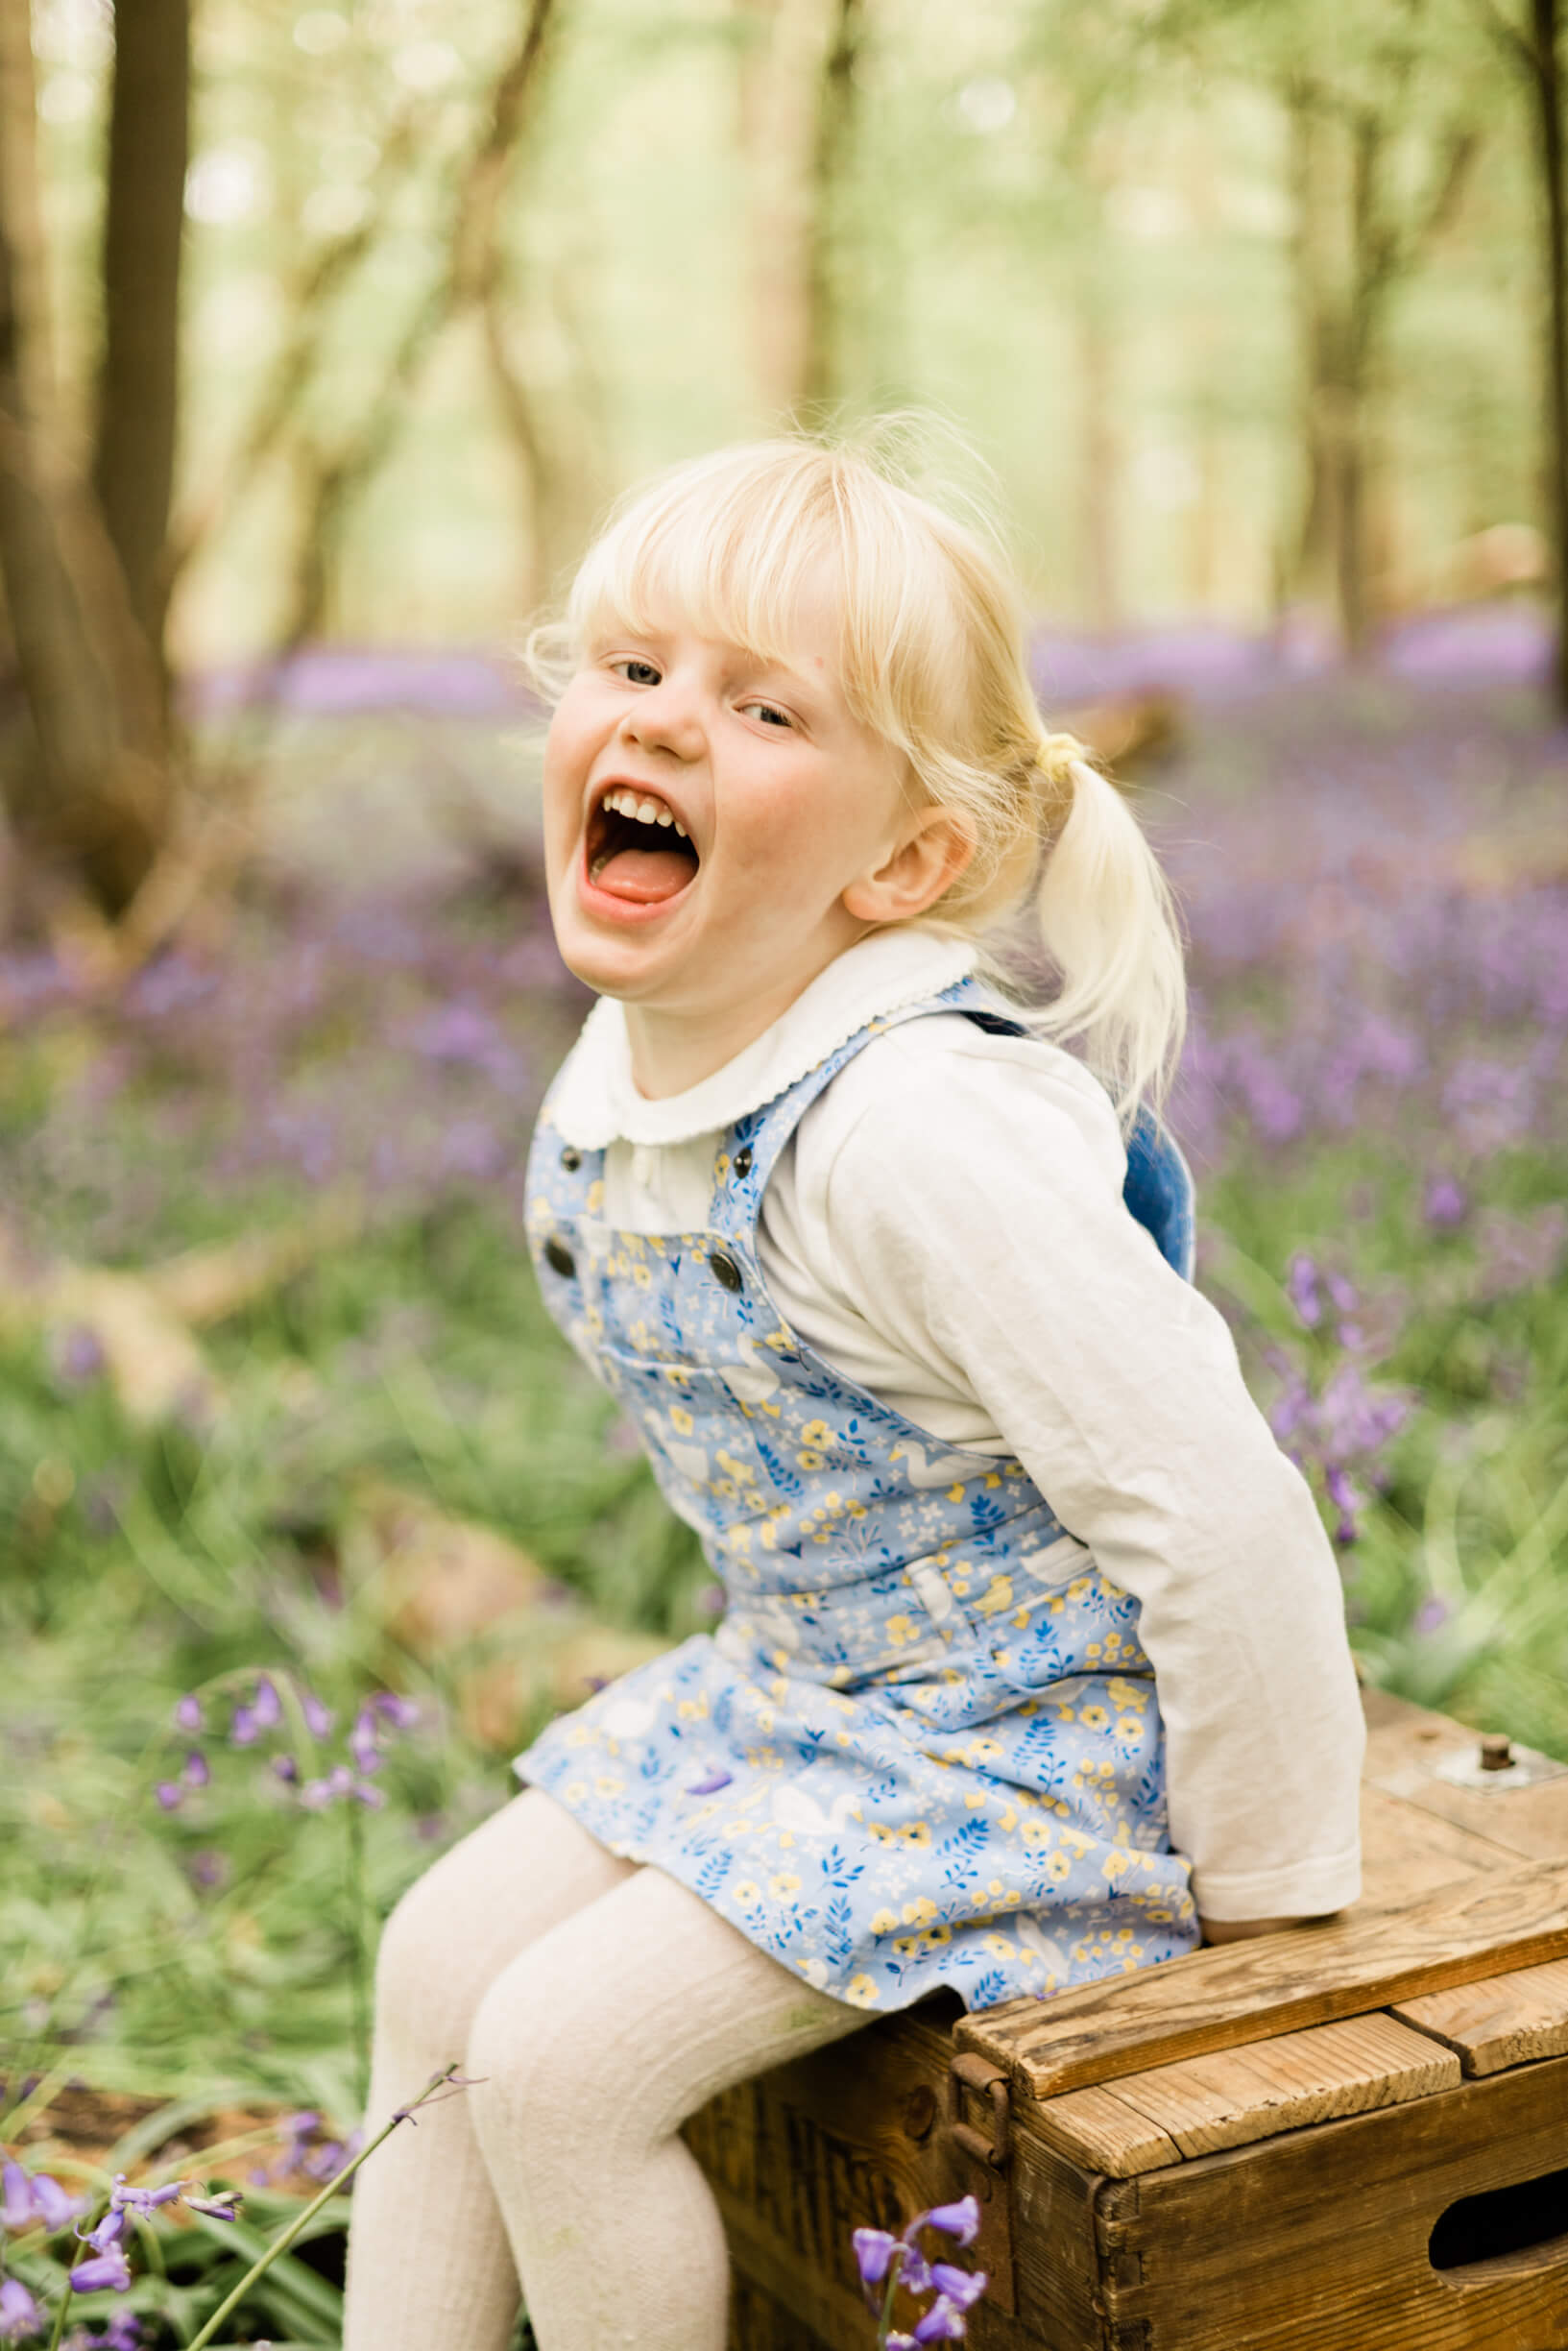 Laughing girl sat amongst the springtime bluebells in Essex during her relaxed, child photoshoot. Captured by Kika Mitchell Photography